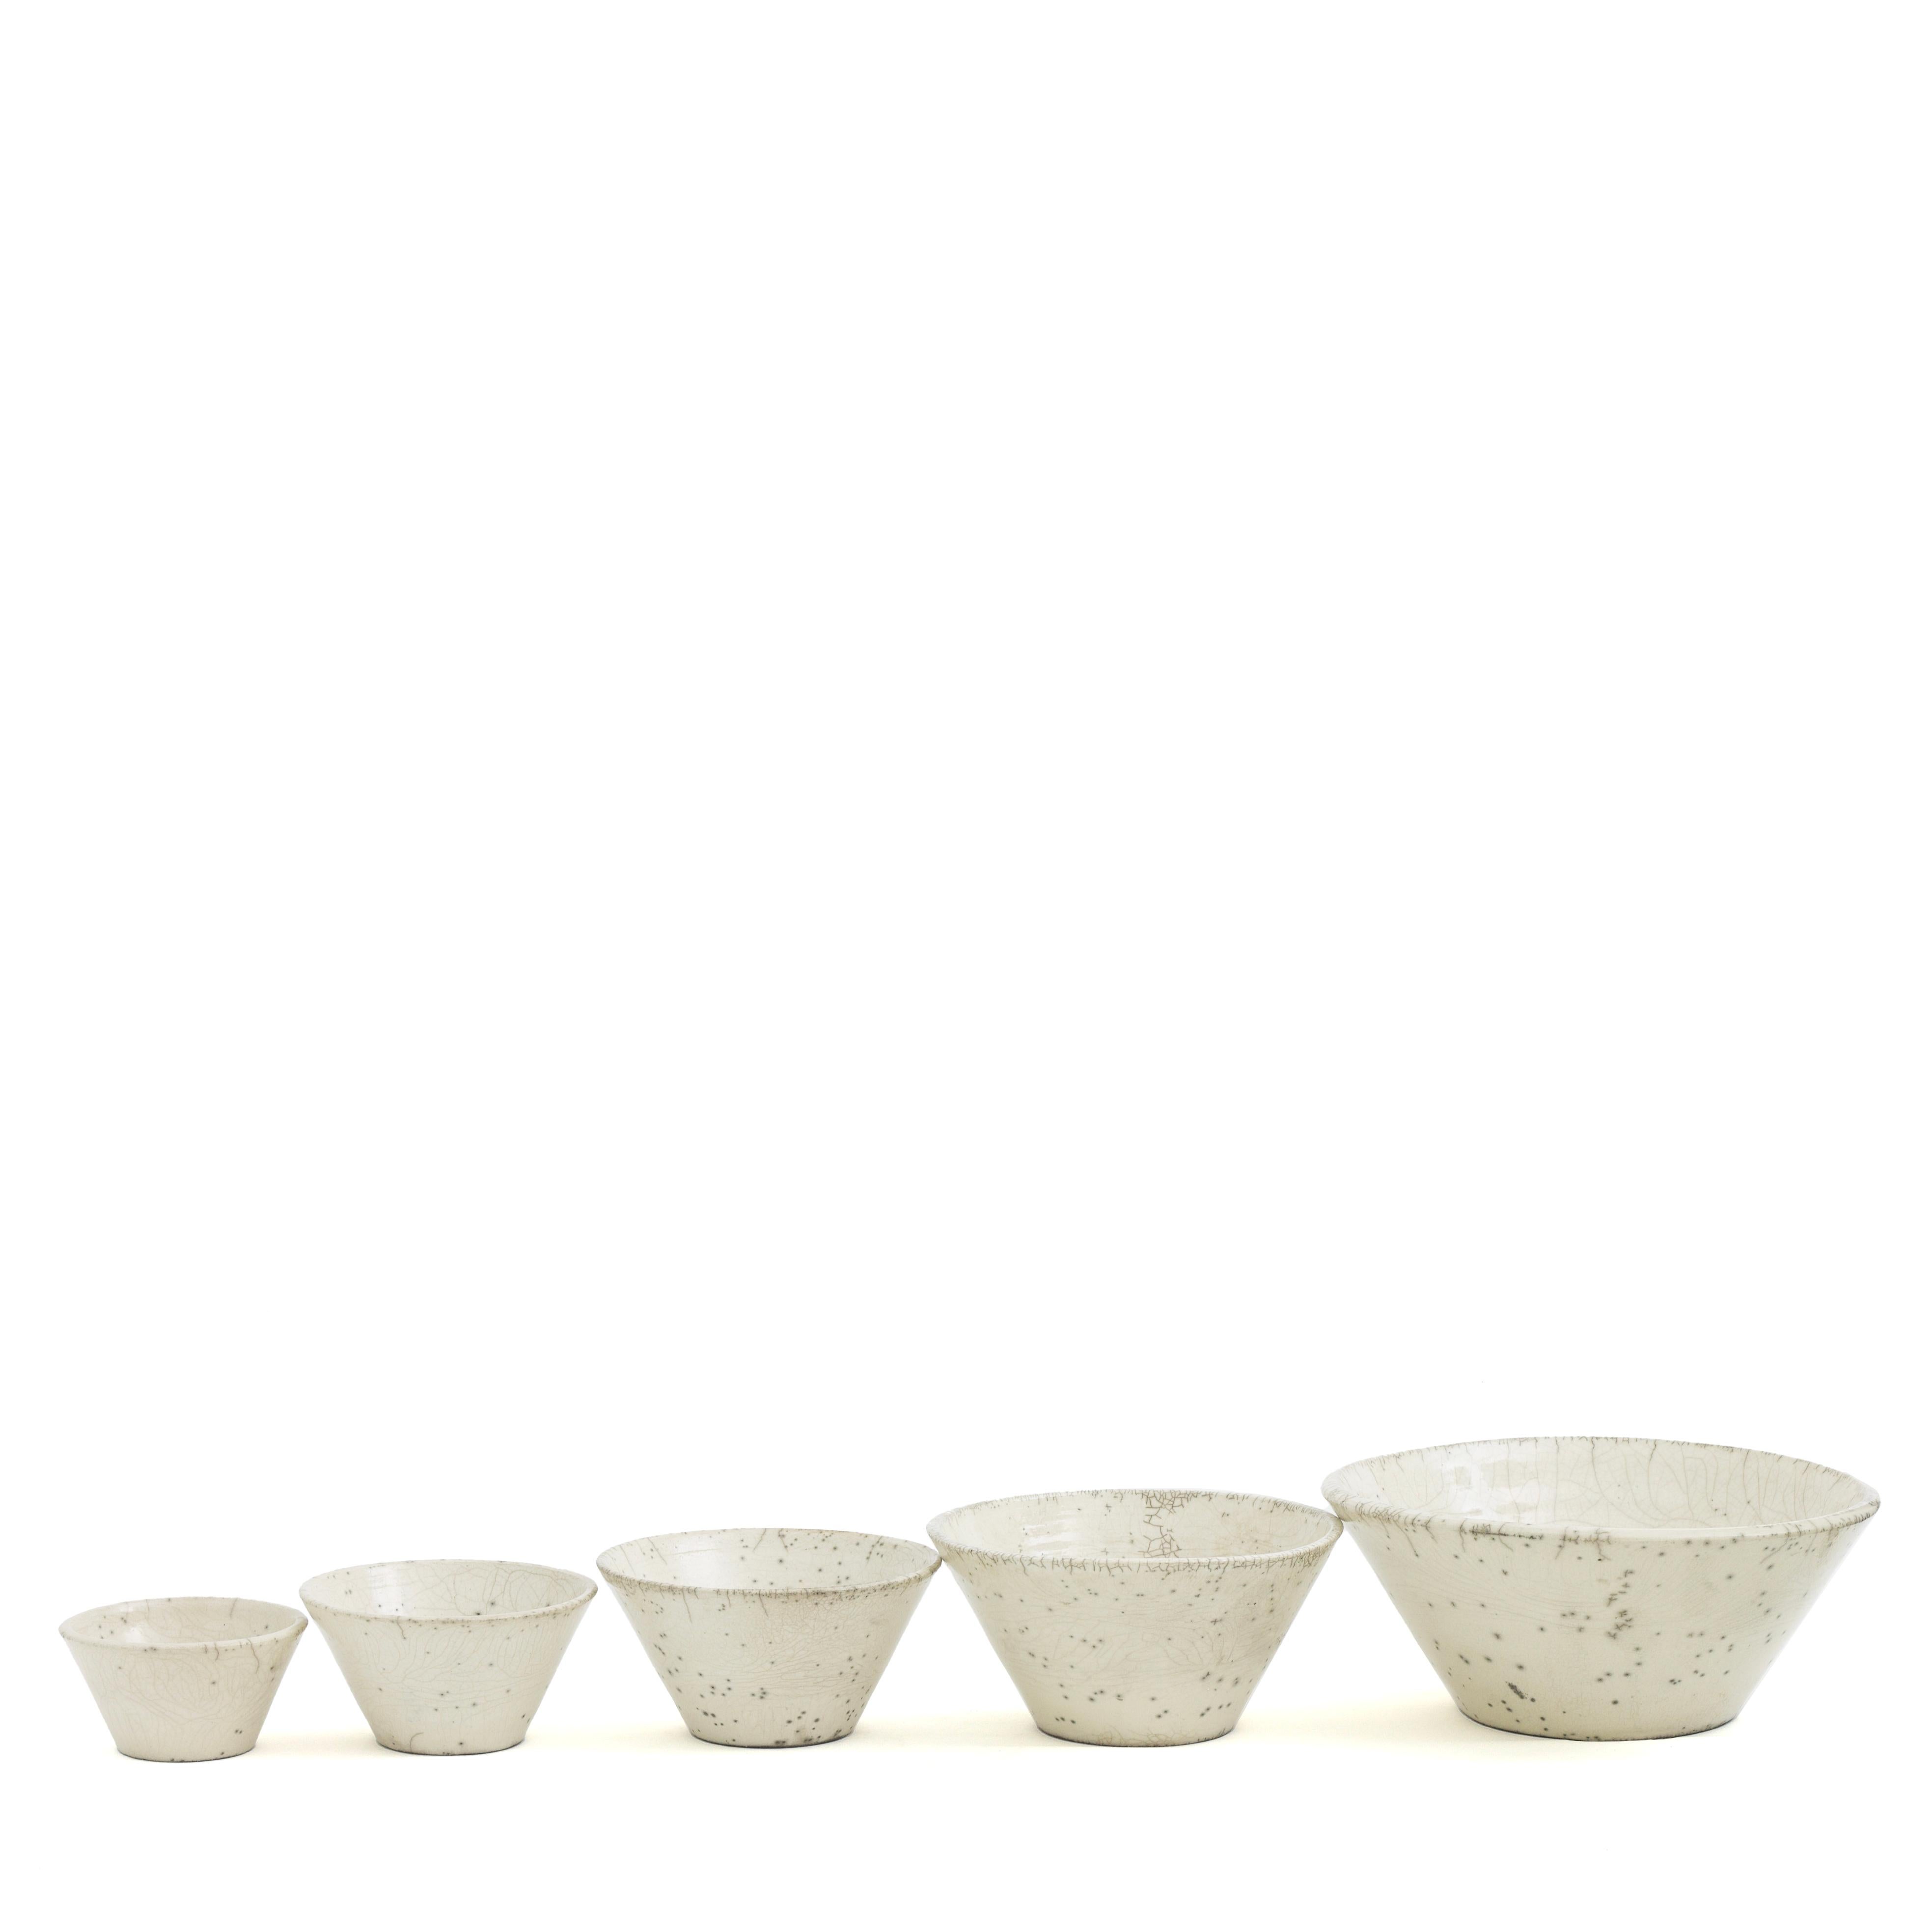 Moon Set Of 5 Bowls


Handcrafted of white ceramic following the ancient Japanese technique of Raku to create an elegant crackled effect, this set of five bowls will set a distinctive tone to modern tableware collections. Tiny speckles adorn the